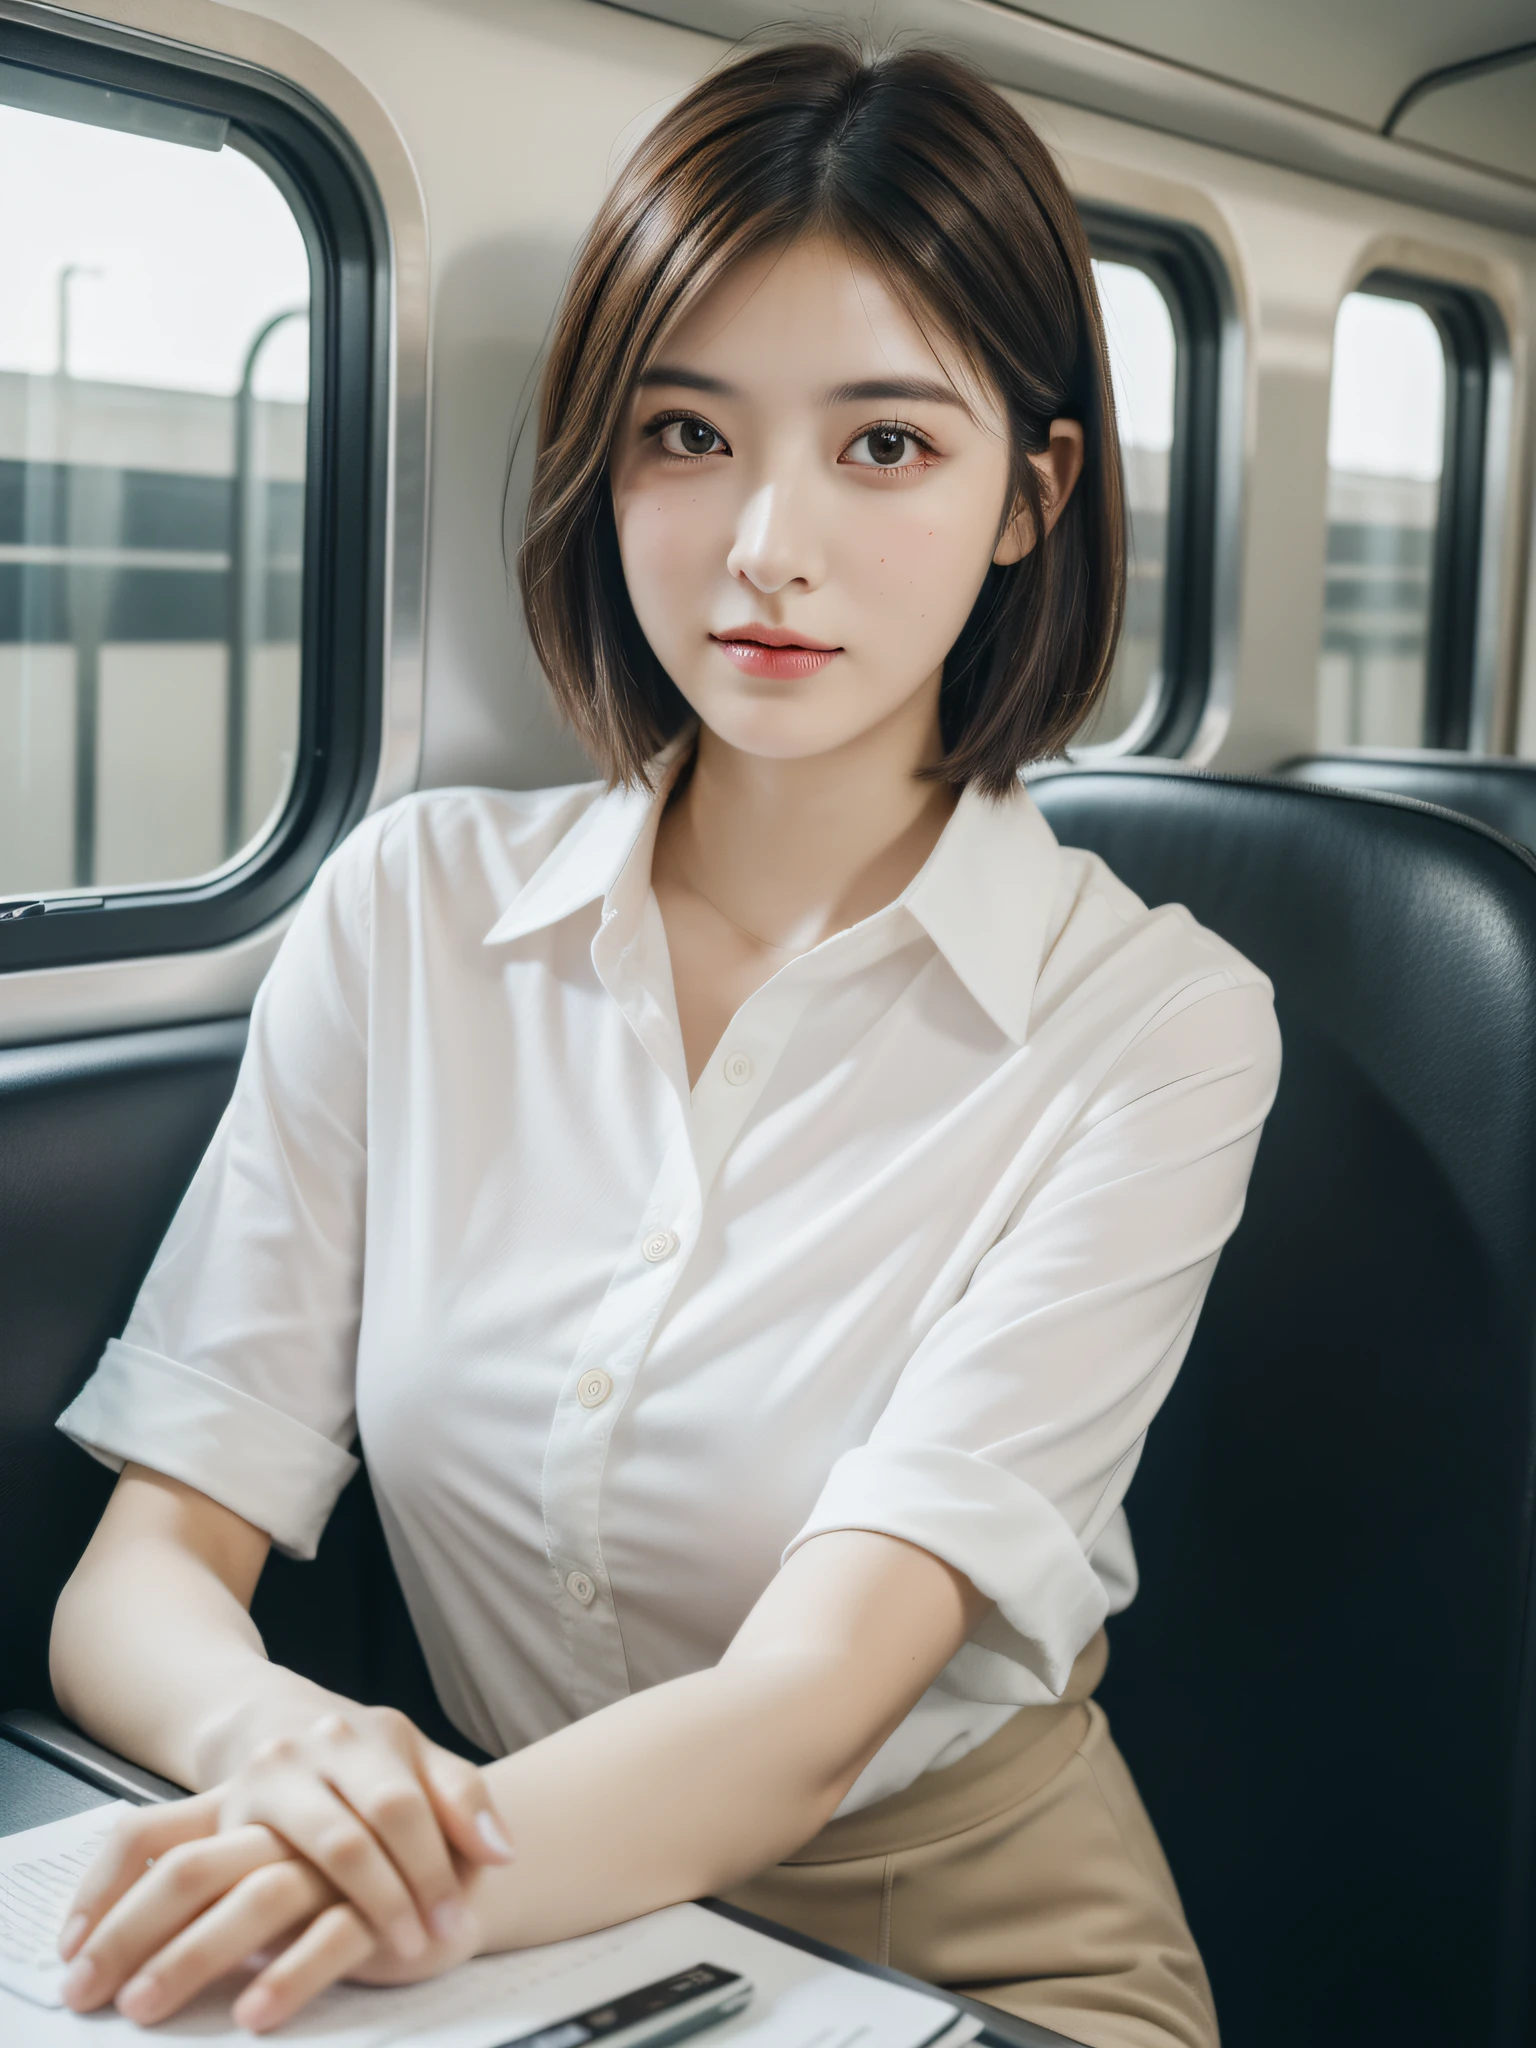 ((Best quality, 8k, Masterpiece: 1.3, raw photo)), Sharp focus: 1.2, (1 AESPA girl: 1.1), (realistic, photo-realistic:1.37), face focus, cute face, small breasts, flat chested, brunette short messy hair, kindness, sitting in a train seat, white shirt, business skirt, sunlight, cinematic lighting